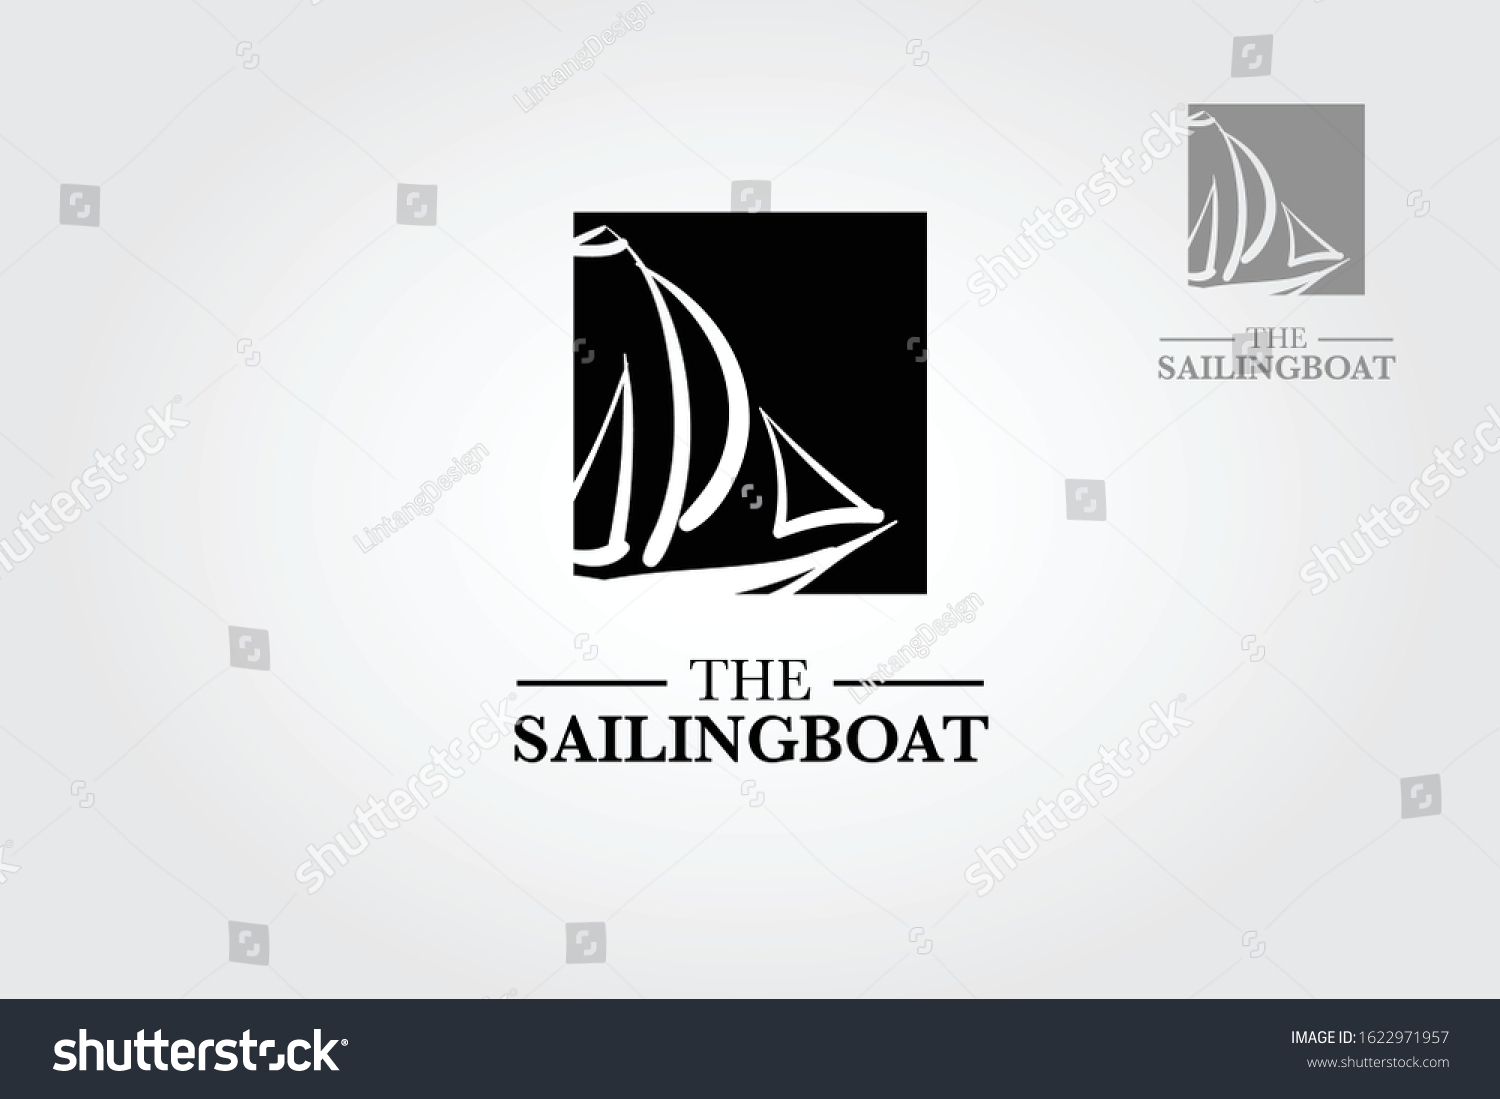 Sailing Boat Silhouette Logo This Logo Stock Vector (Royalty Free ...